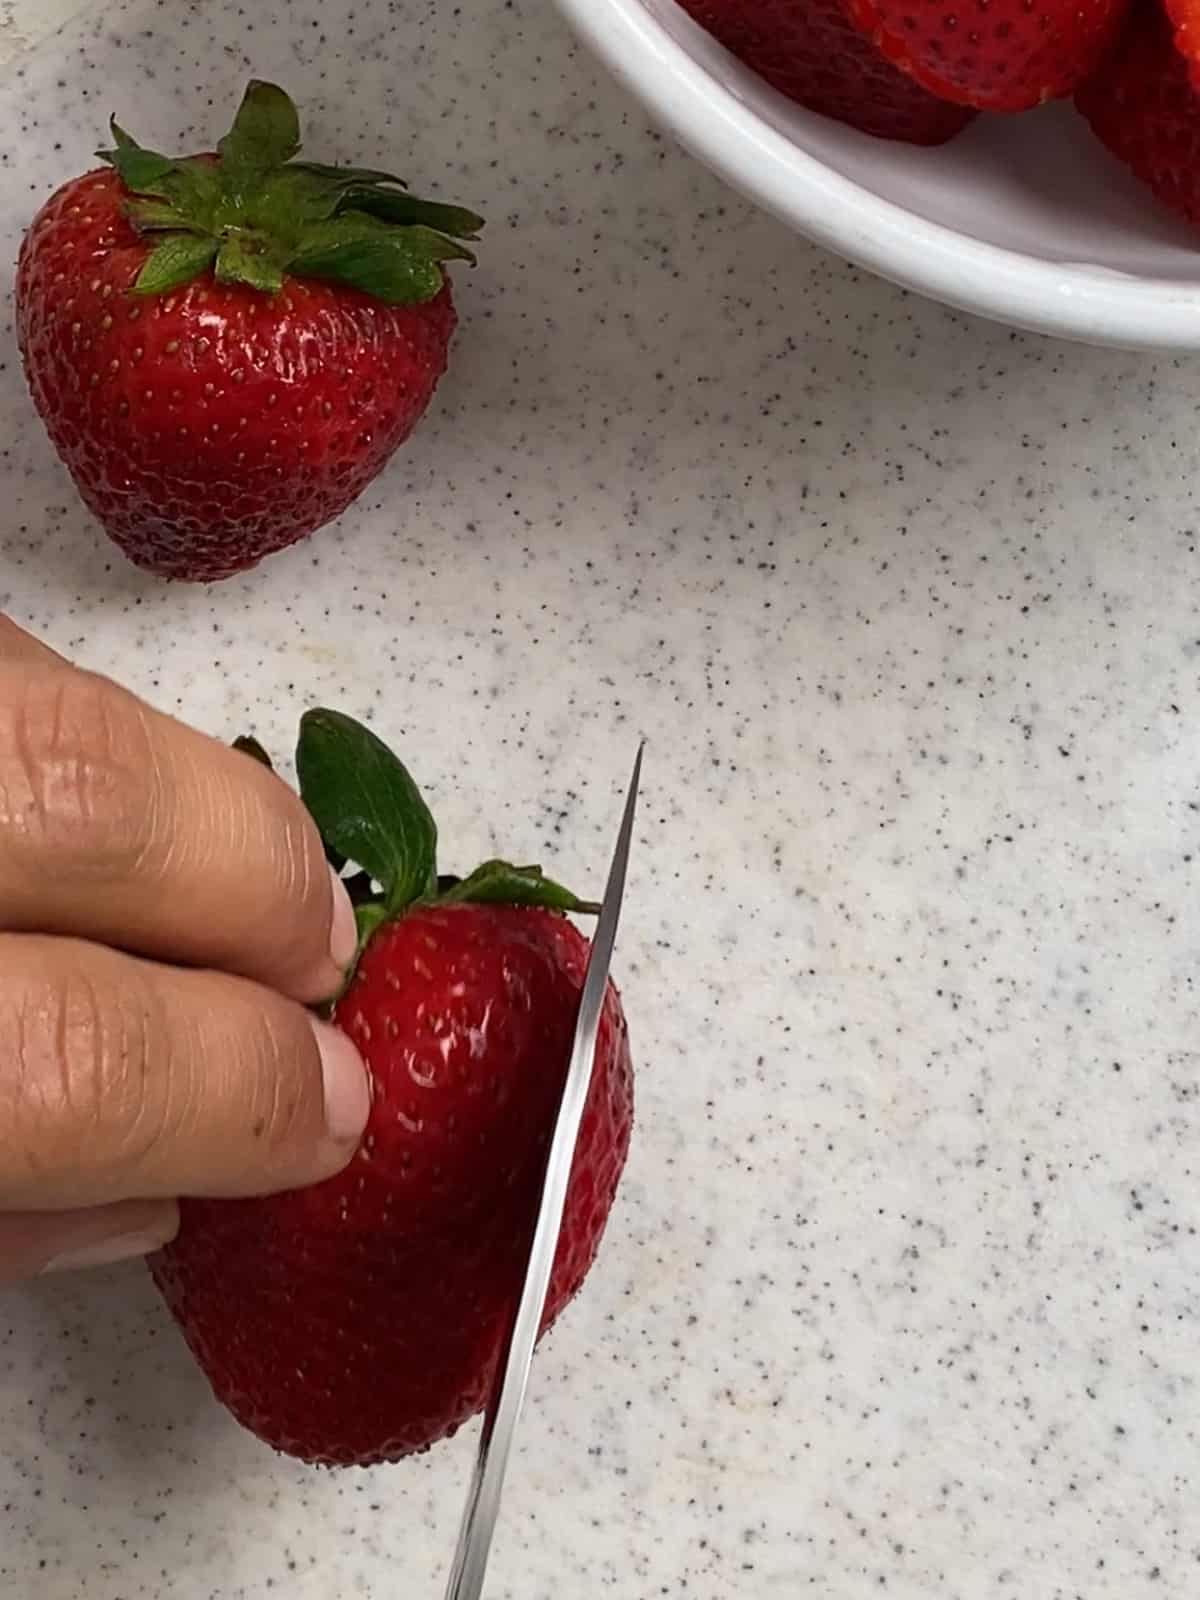 process of cutting strawbberries